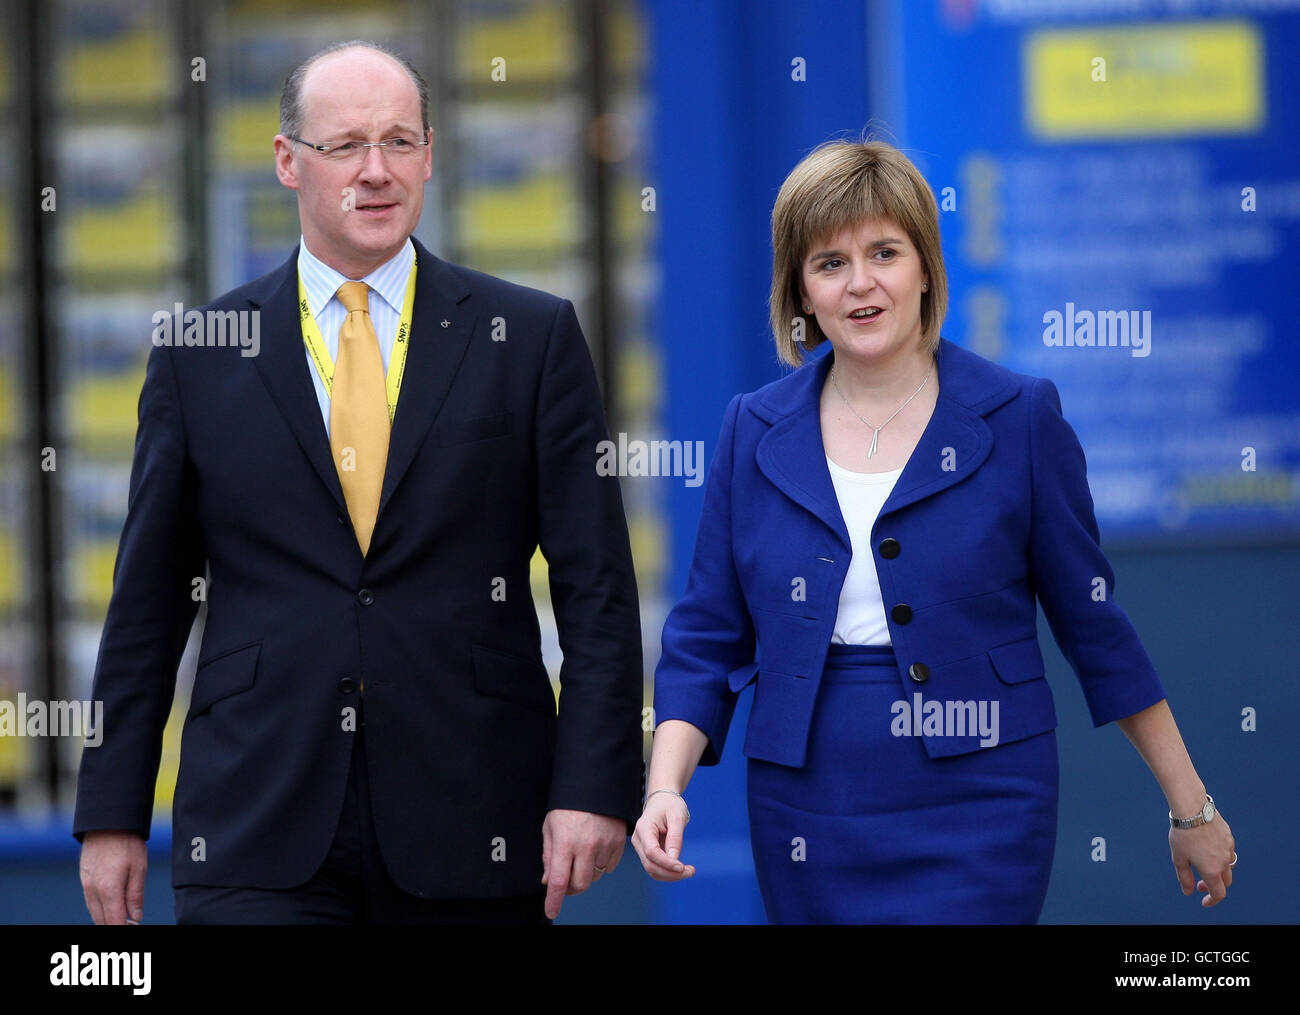 Deputy First Minister Nicola Sturgeon arrives with Cabinet Secretary for Finance John Swinney for the annual Scottish National Party Conference in Perth. Stock Photo